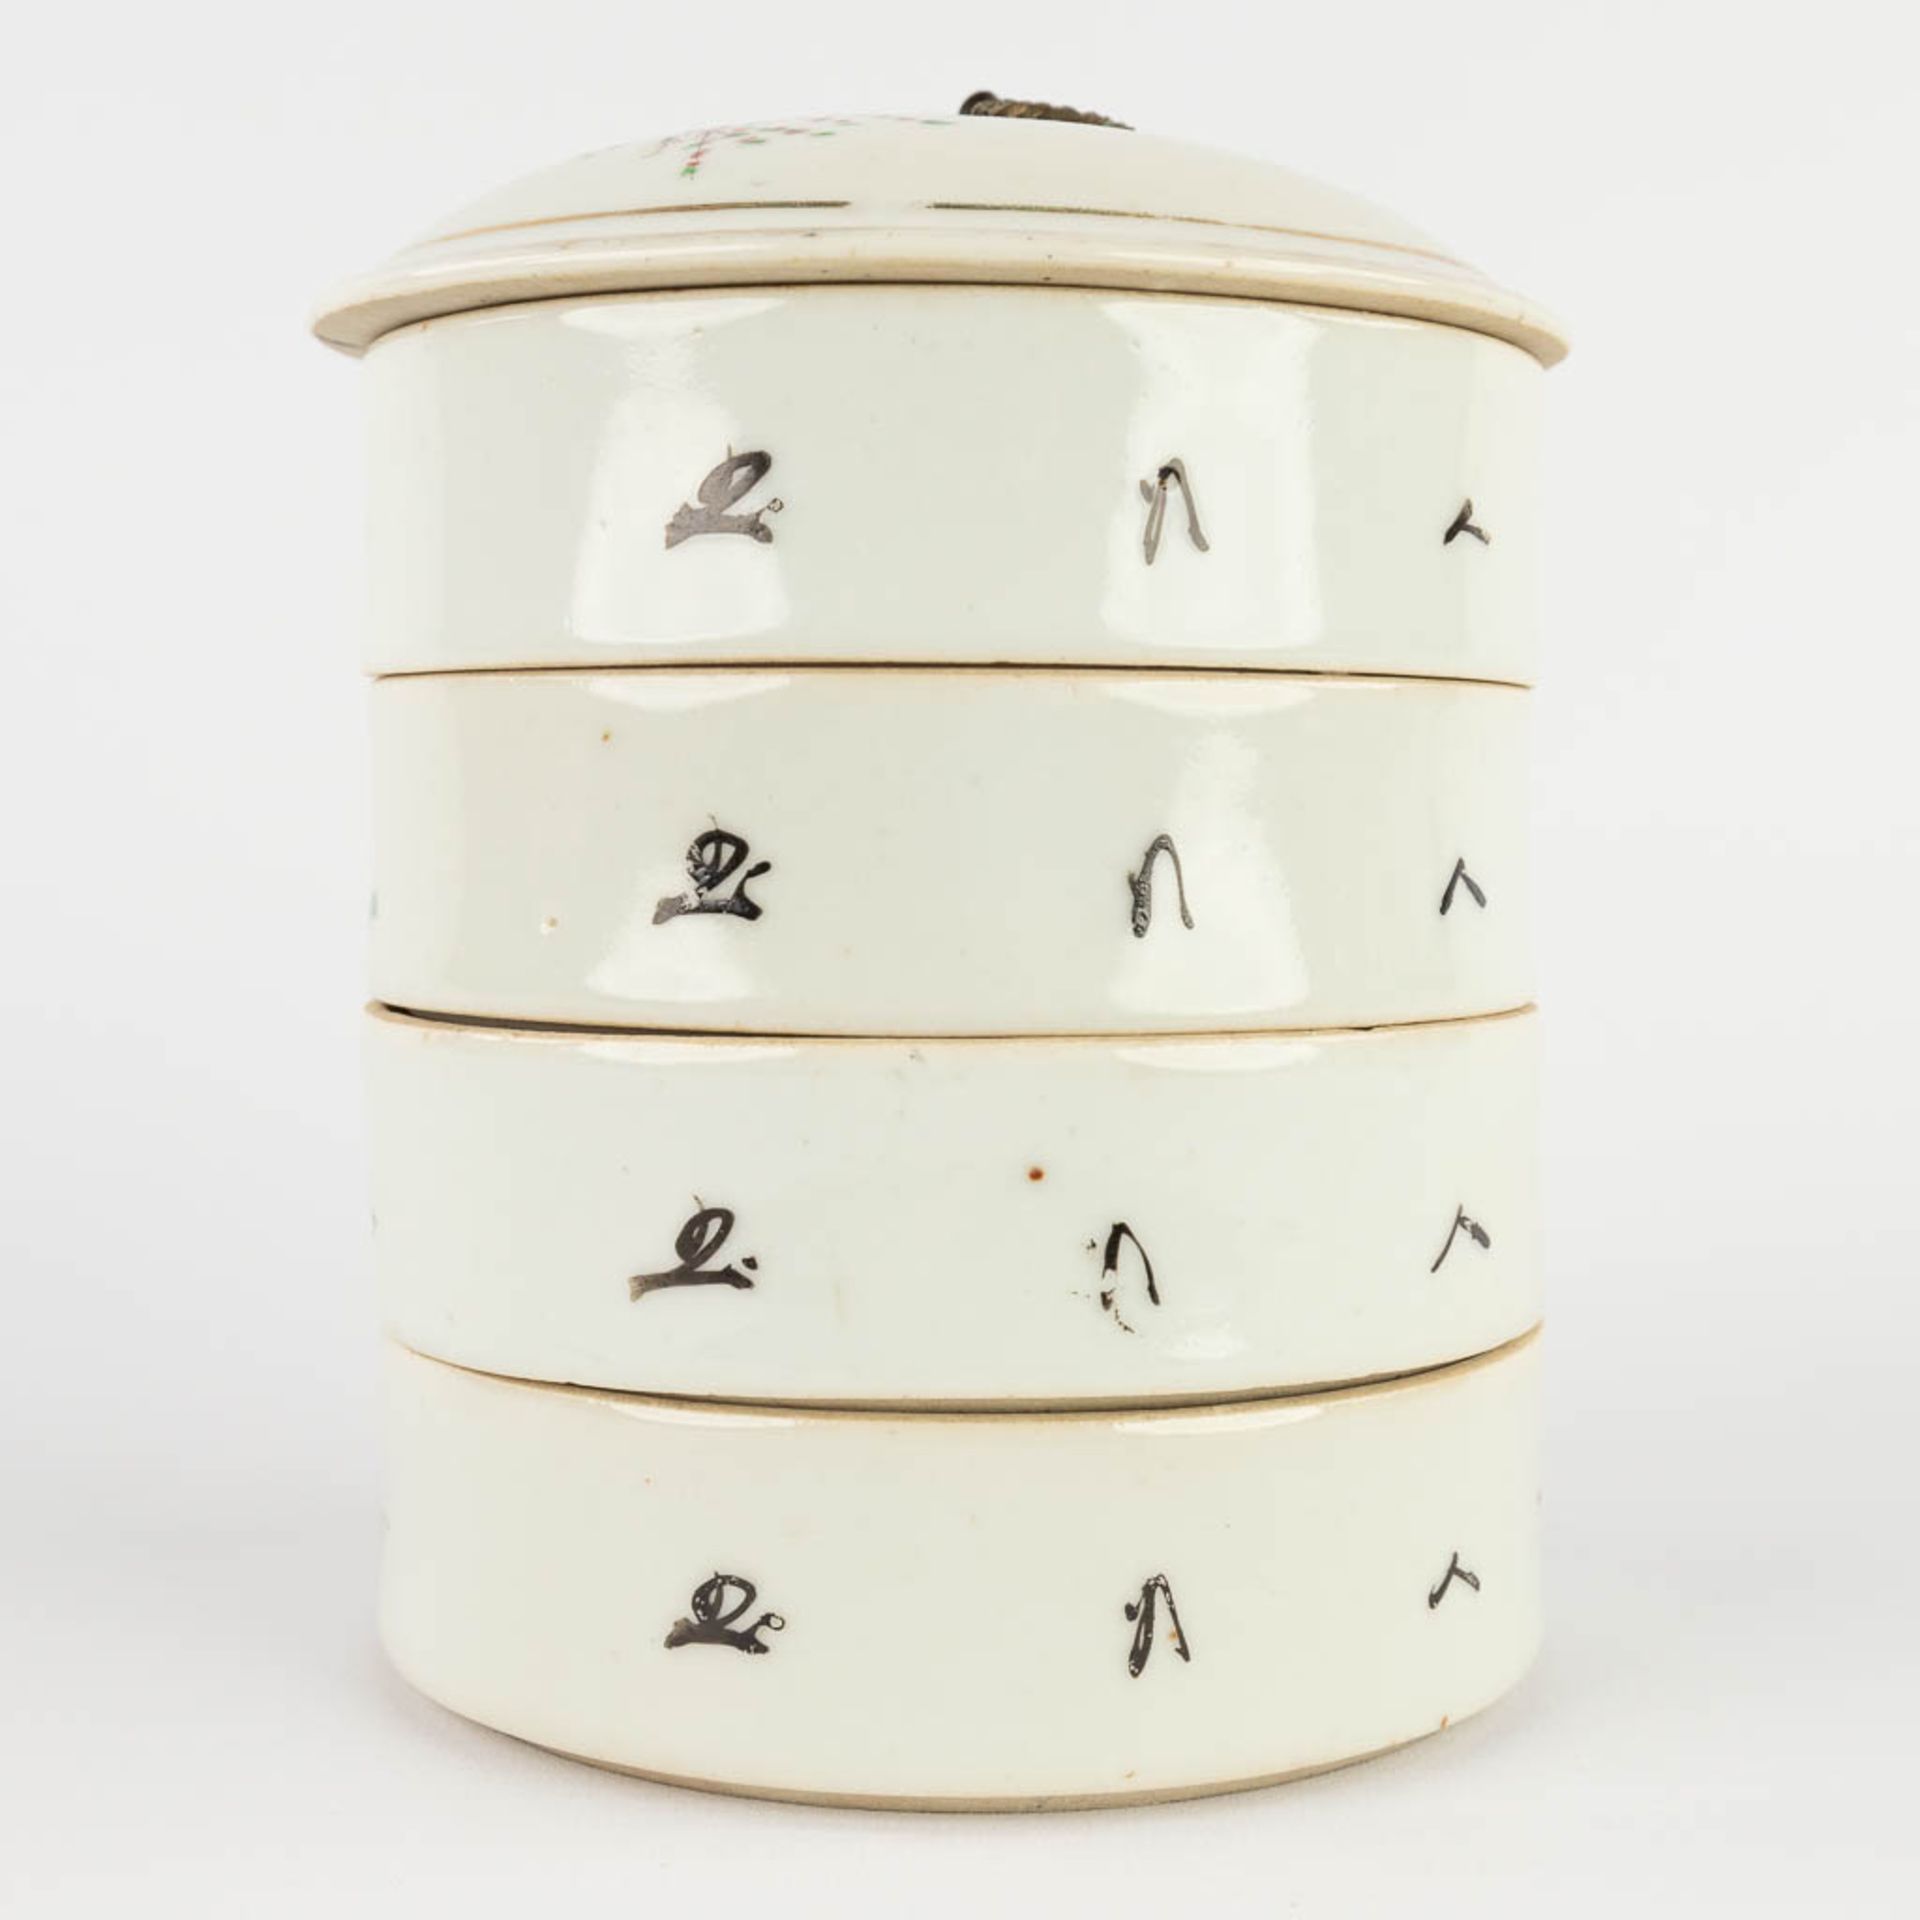 Five pieces of Chinese porcelain, decorated with hand-painted images. 19th/20th C. (H:19 x D:9 cm) - Bild 17 aus 20